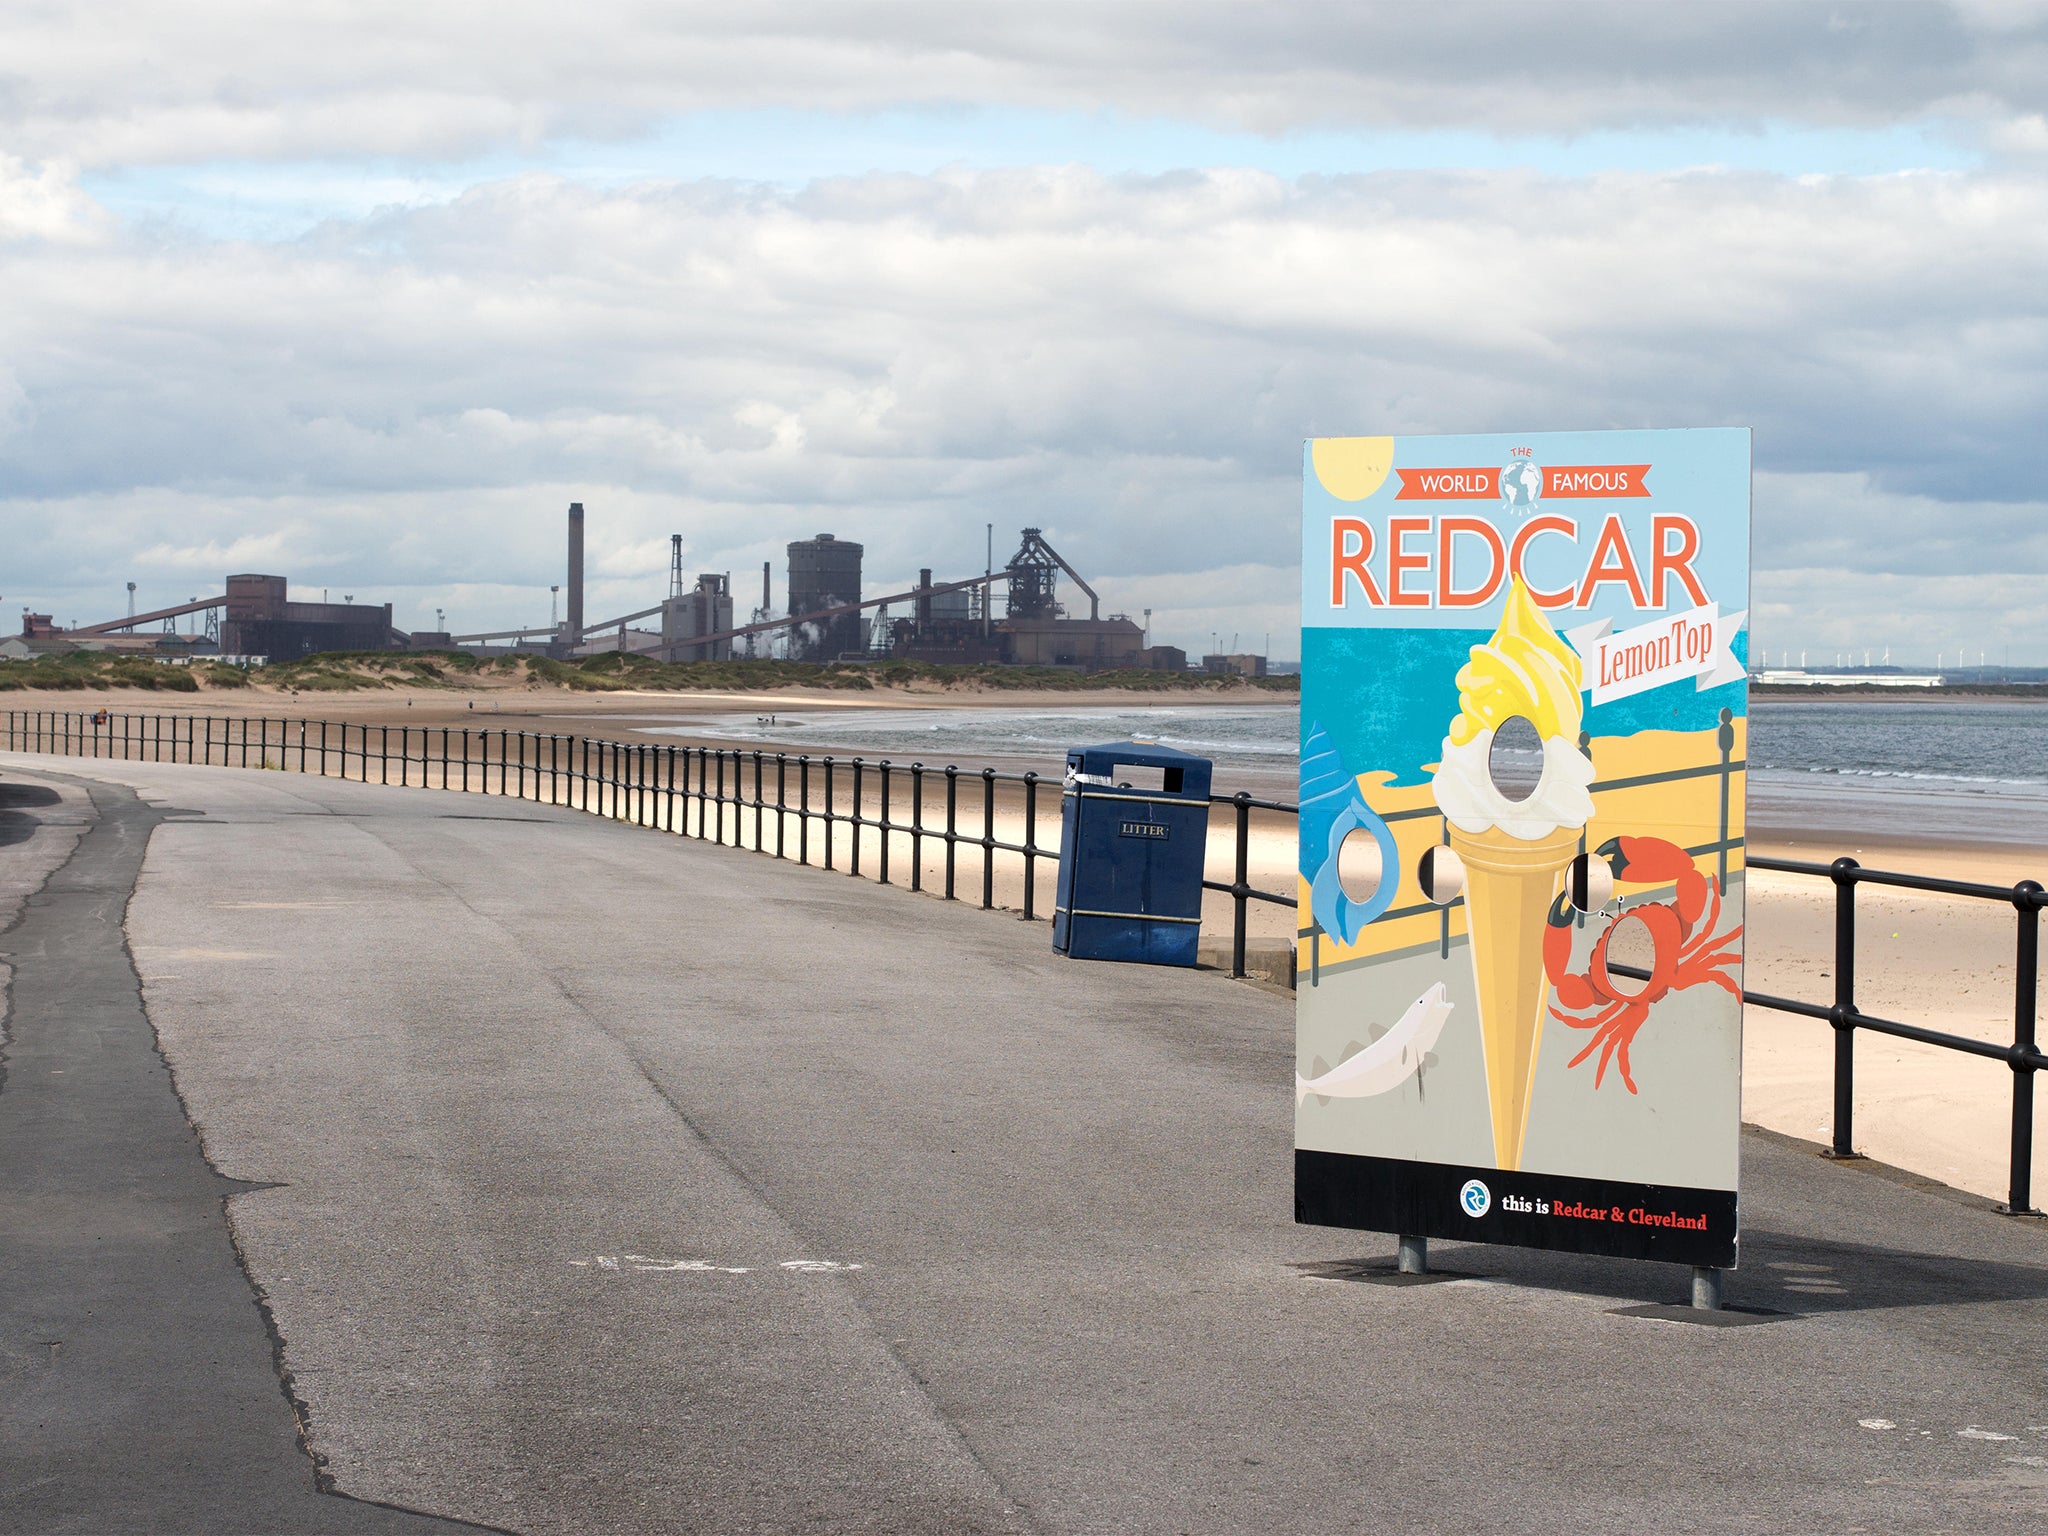 Eight per cent of tweets from Redcar were found to contain profanities